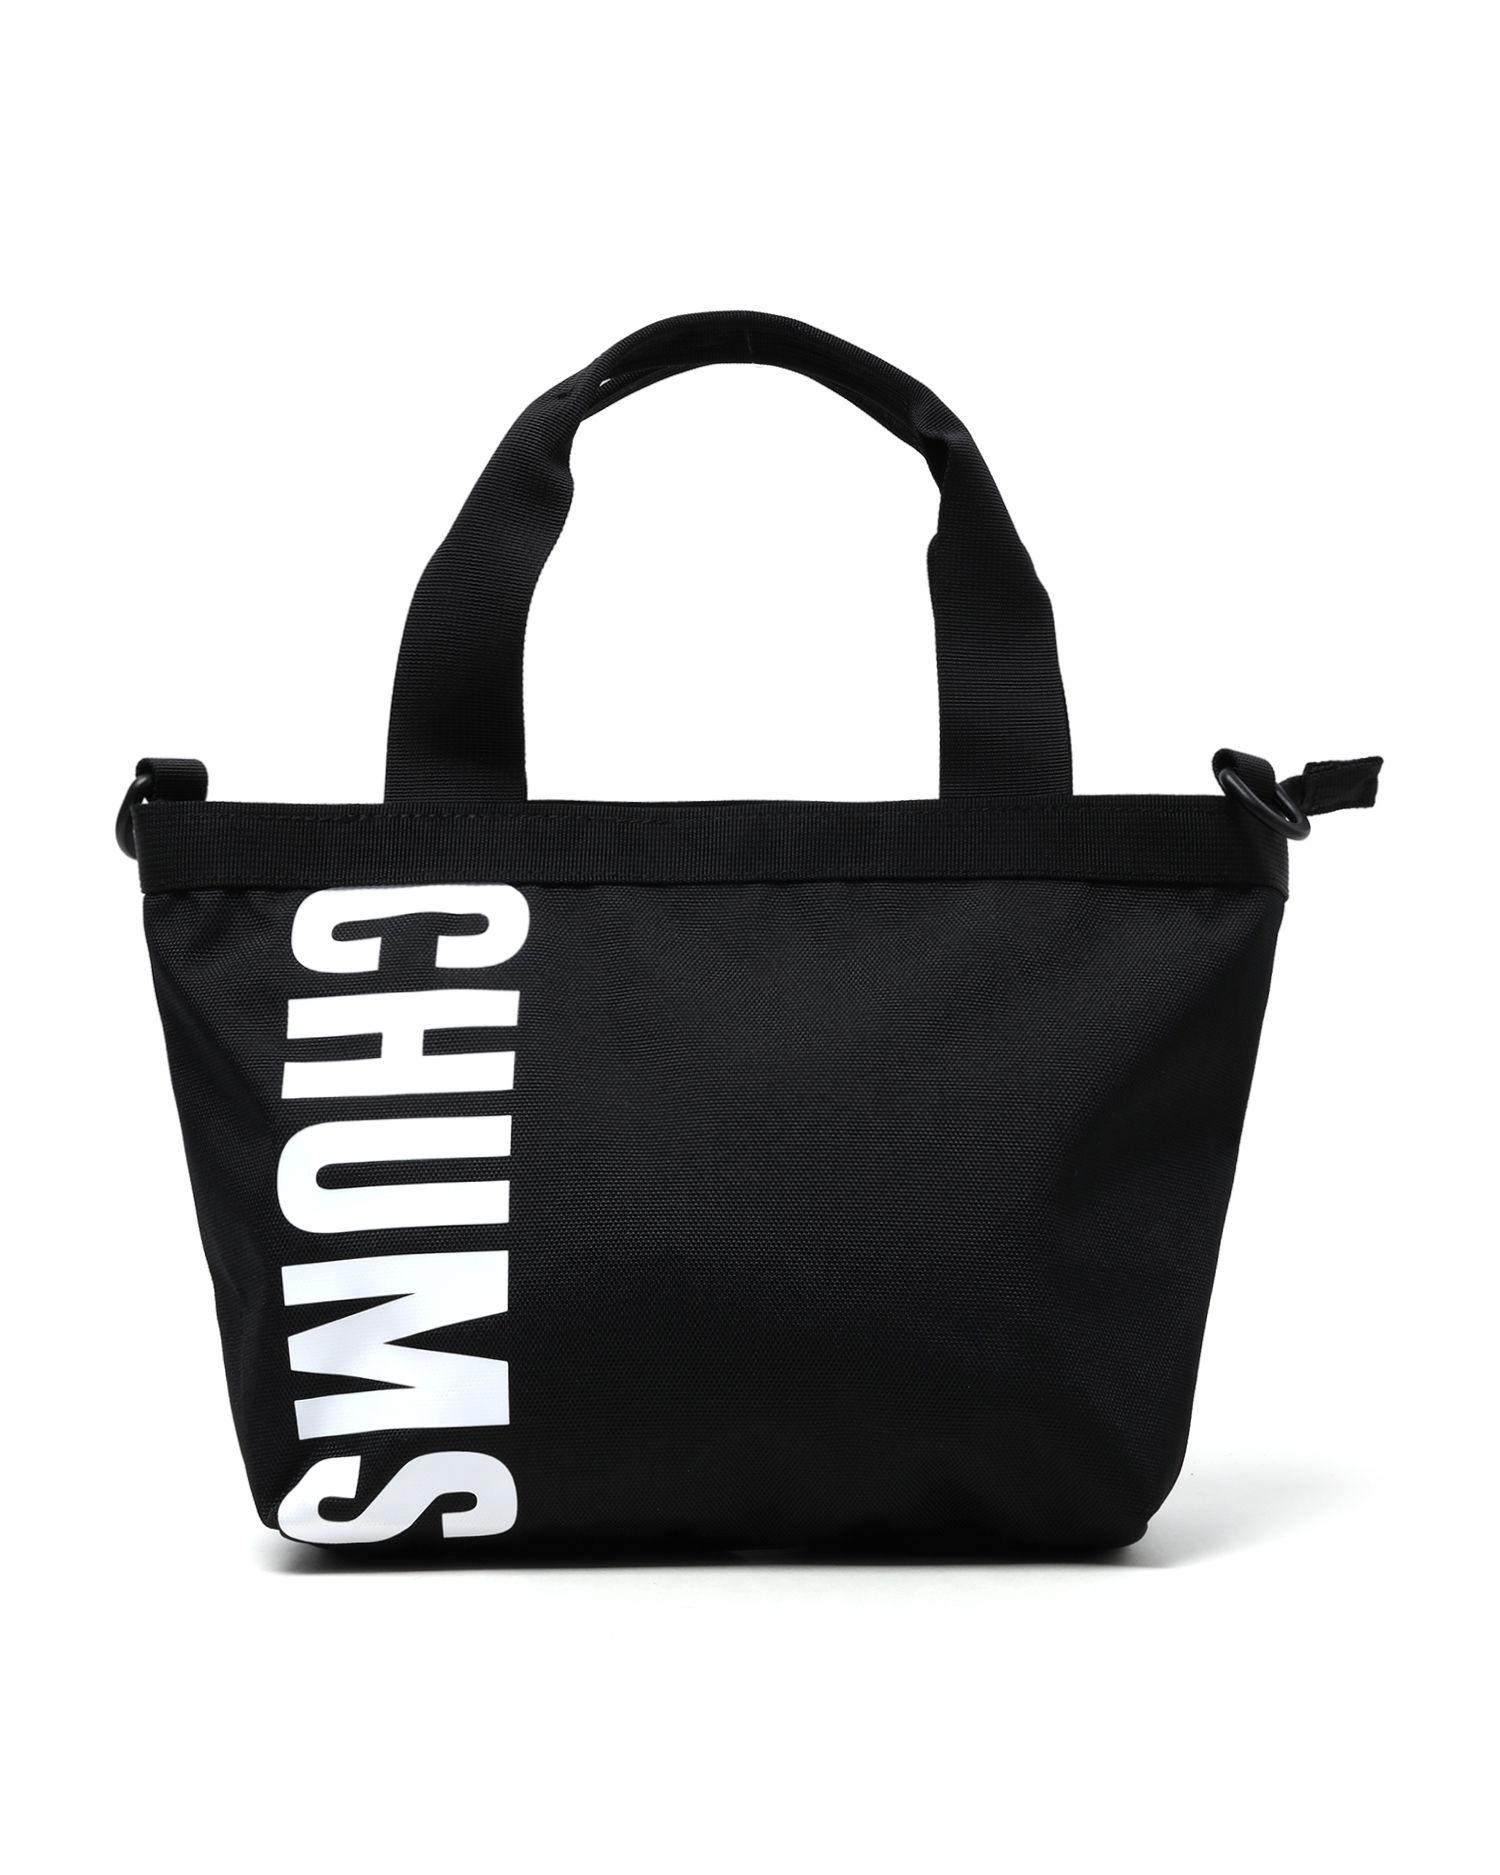 Logo top handle bag by CHUMS